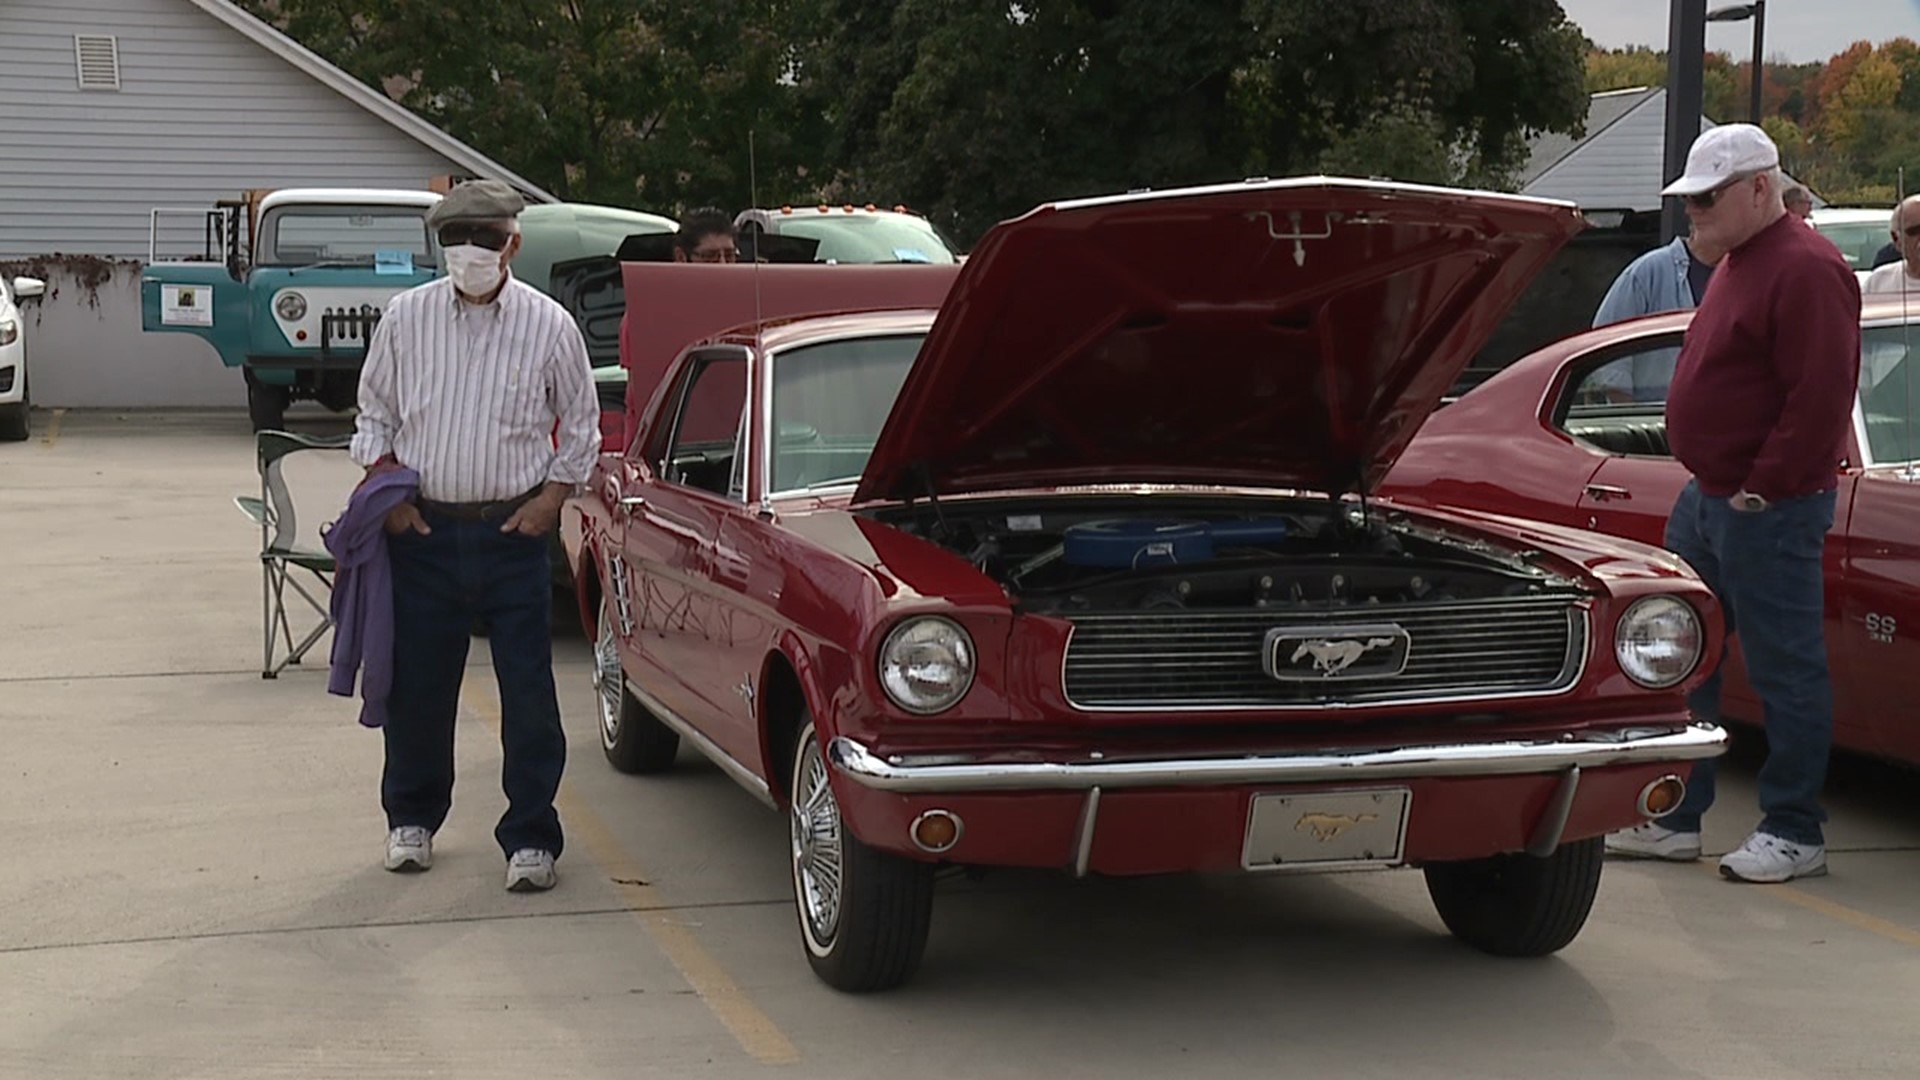 The car show raised money for 'Camp Freedom.'